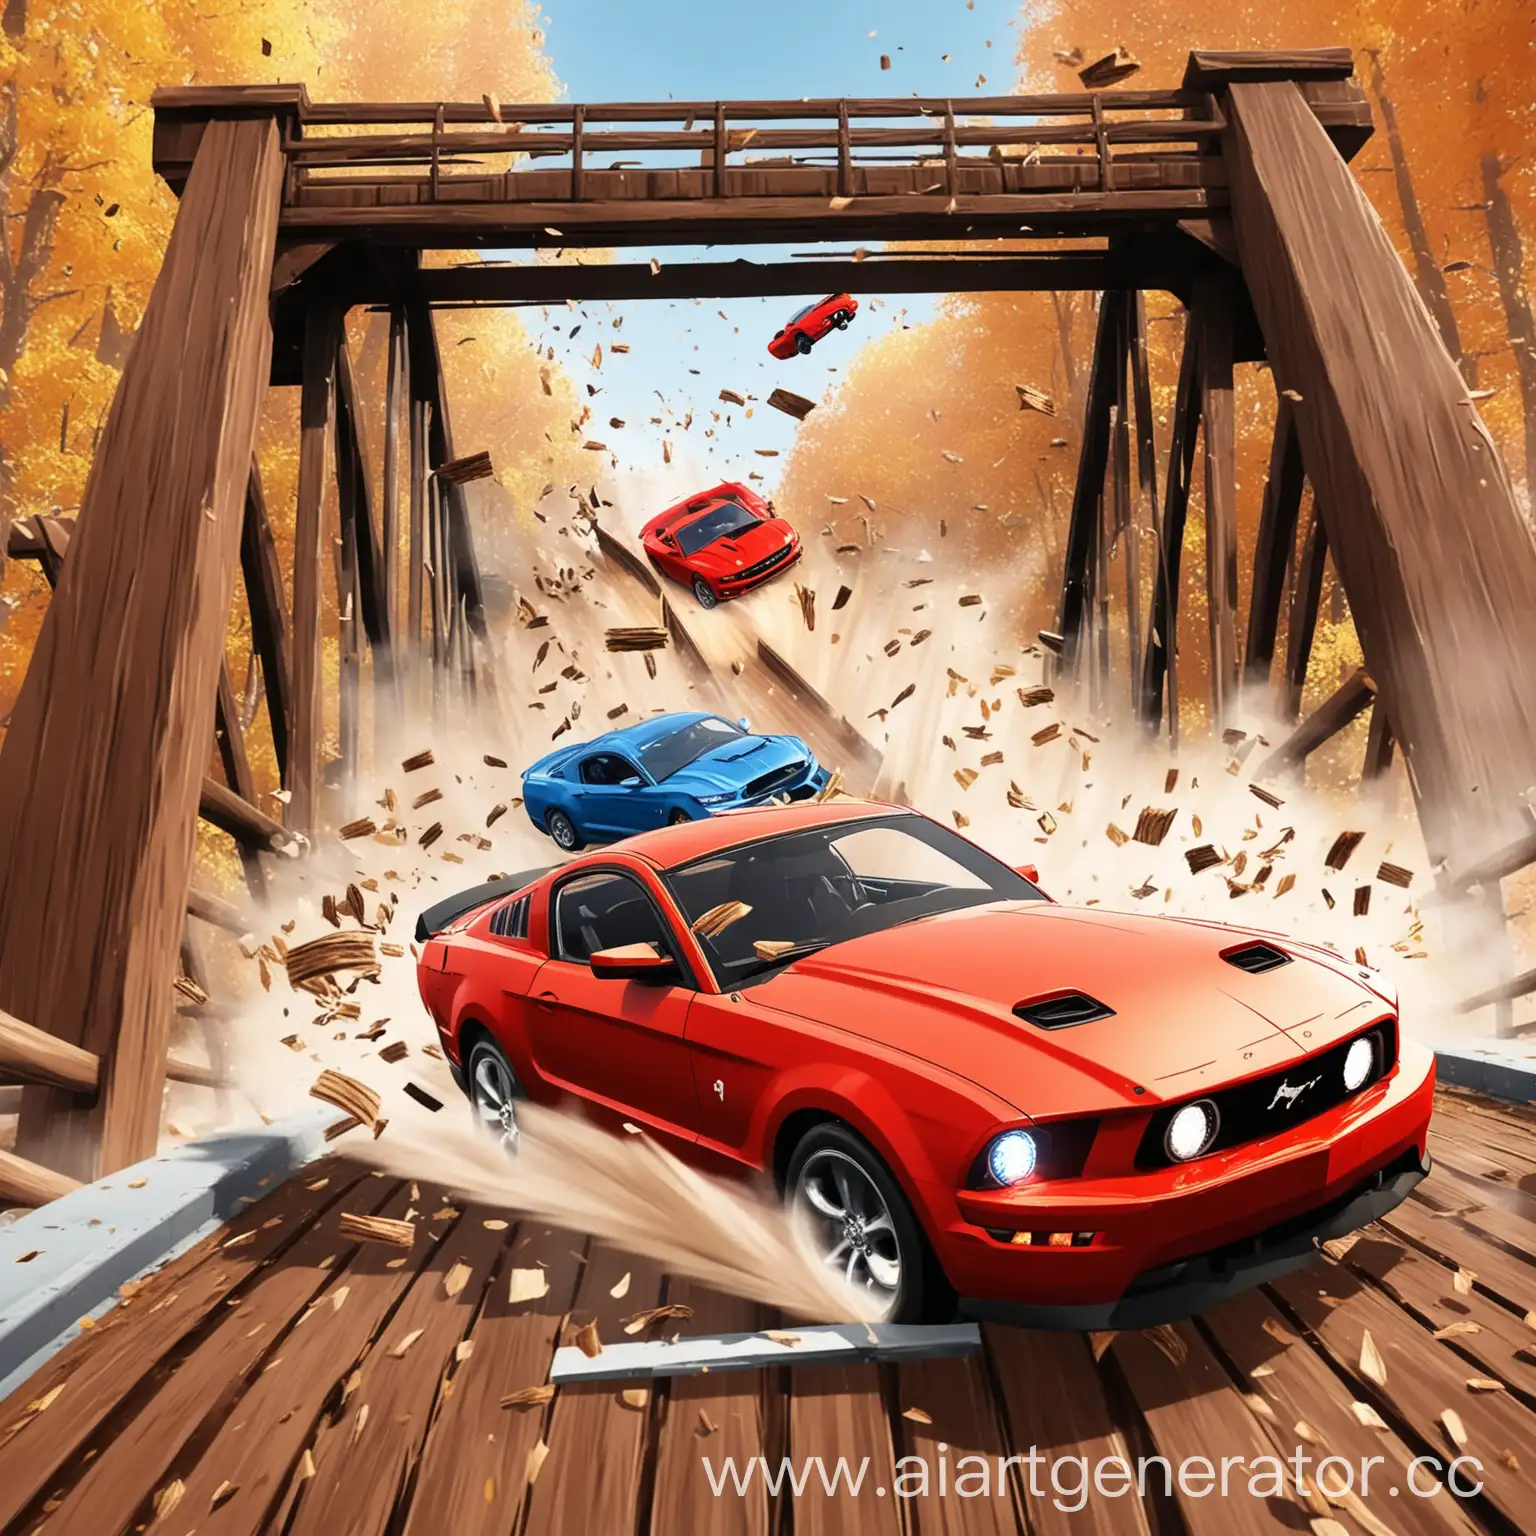 Perilous-Car-Stunt-Red-Mustang-Plunging-from-Spinning-Wooden-Bridge